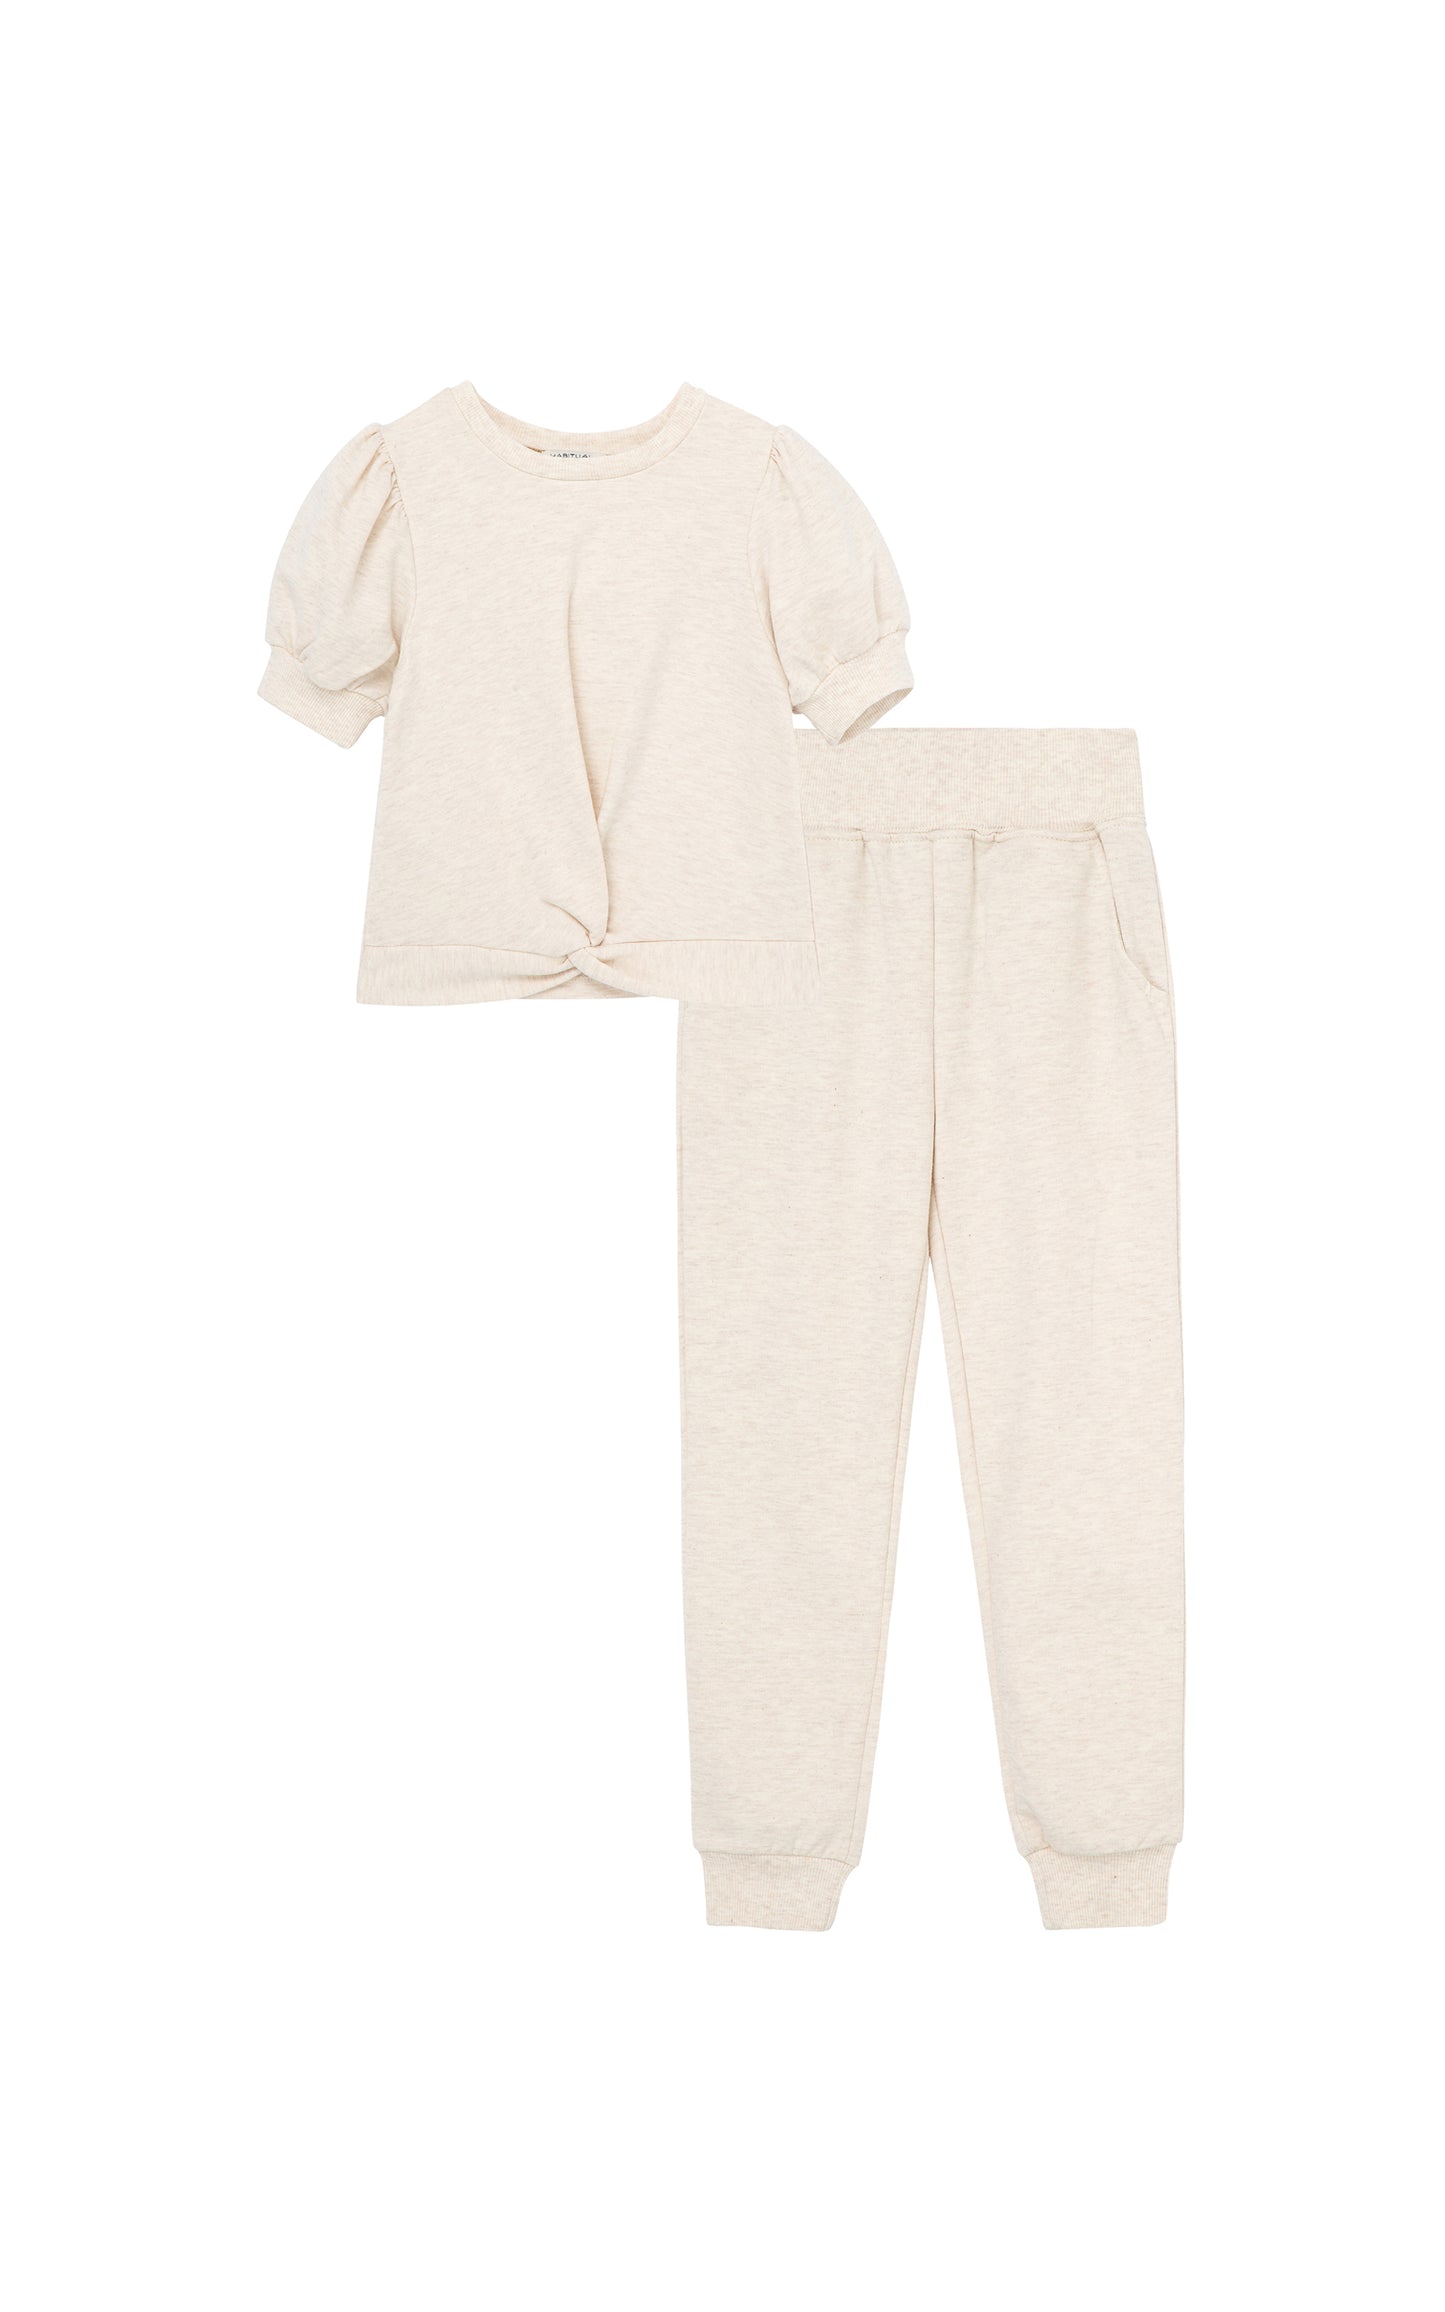 Light beige short sleeve sweatshirt knotted at waist with matching sweatpants